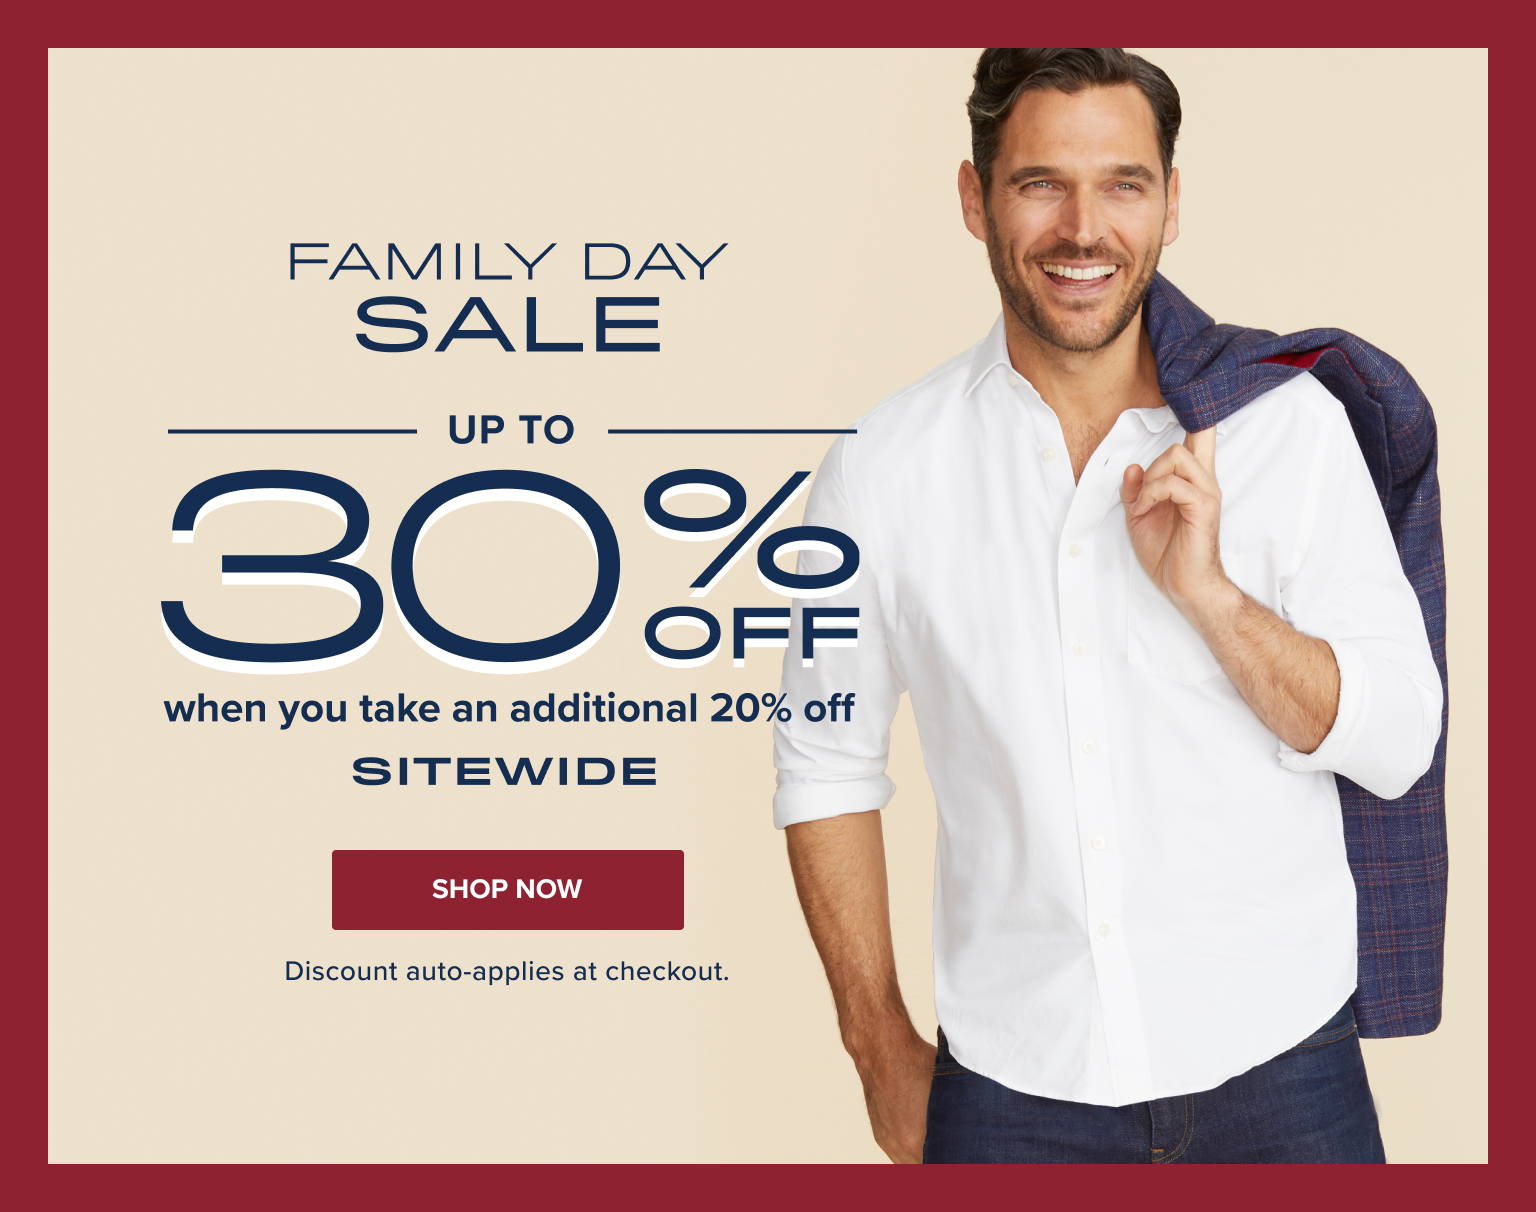 Family Day Sale. Up to 30% Off when you take an additional 20% off sitewide.